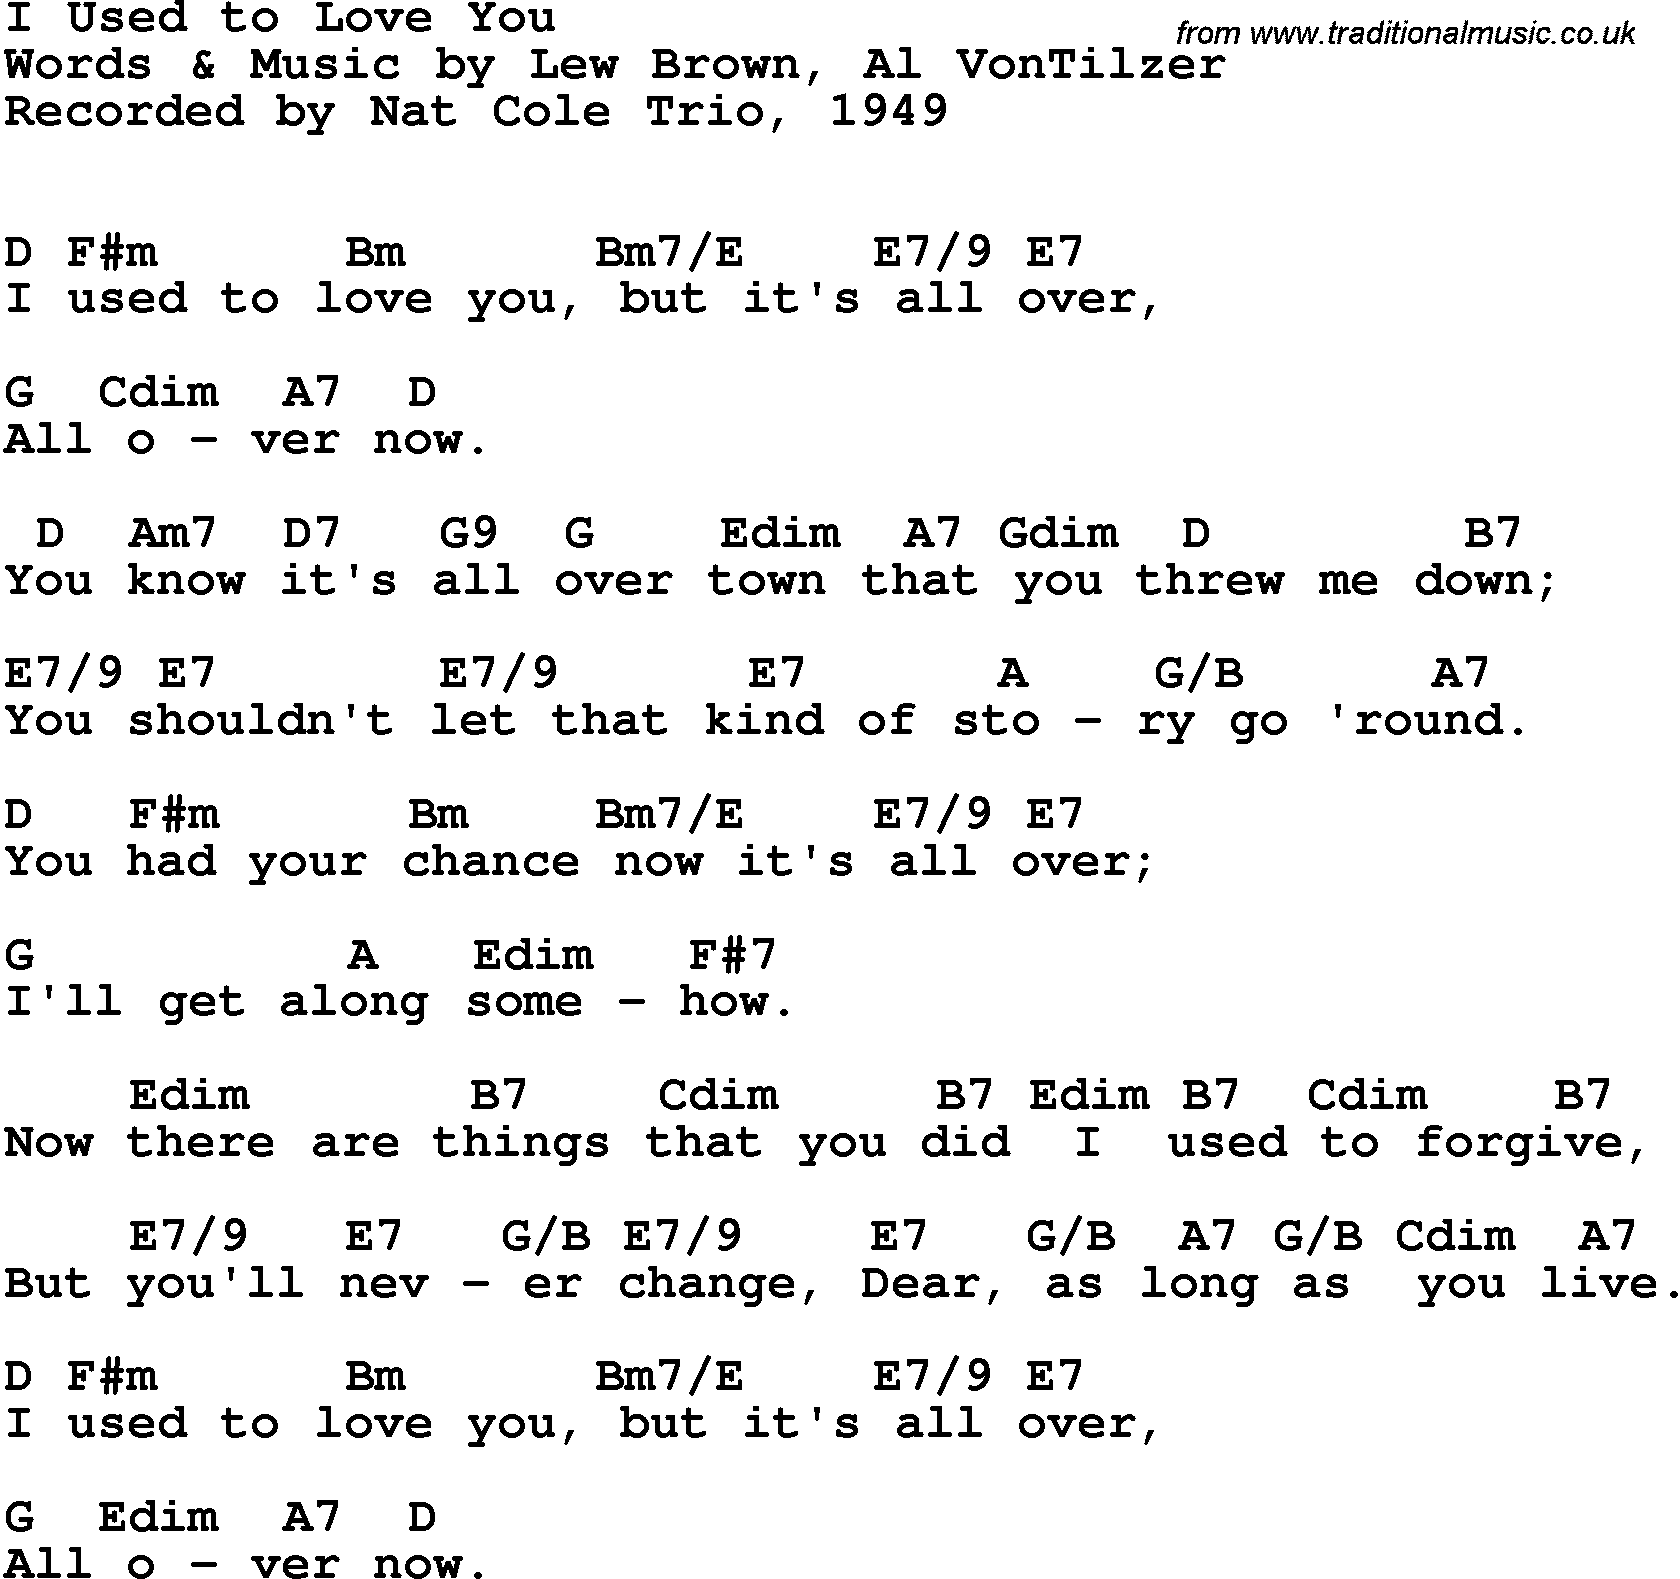 Song Lyrics with guitar chords for I Used To Love You - Nat Cole Trio, 1949